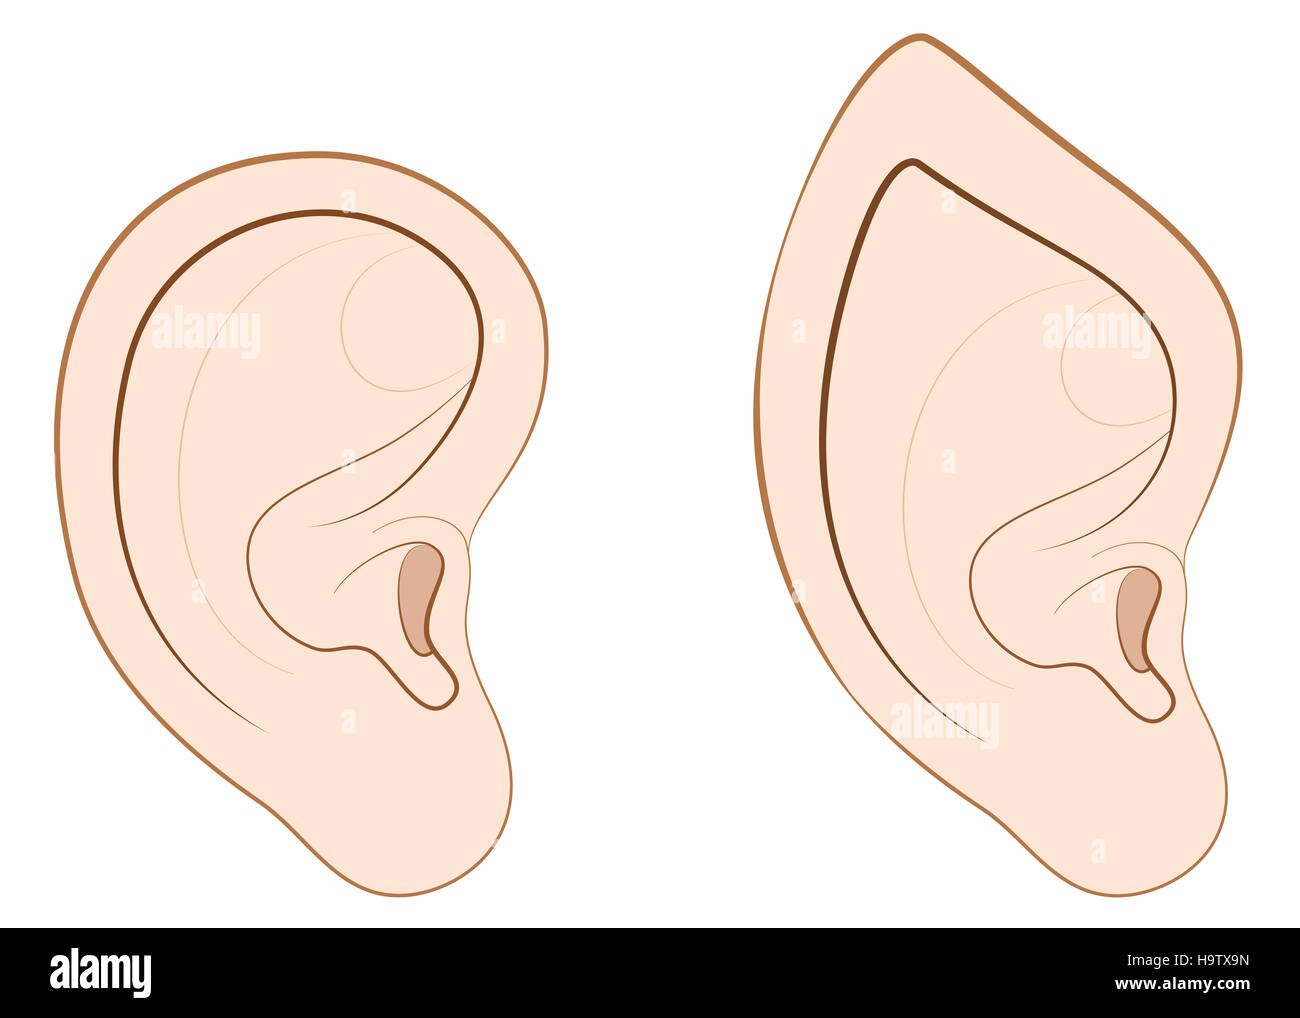 Human ear and pointed ear of an elf, fairy, vampire or other fantasy creature. Stock Photo